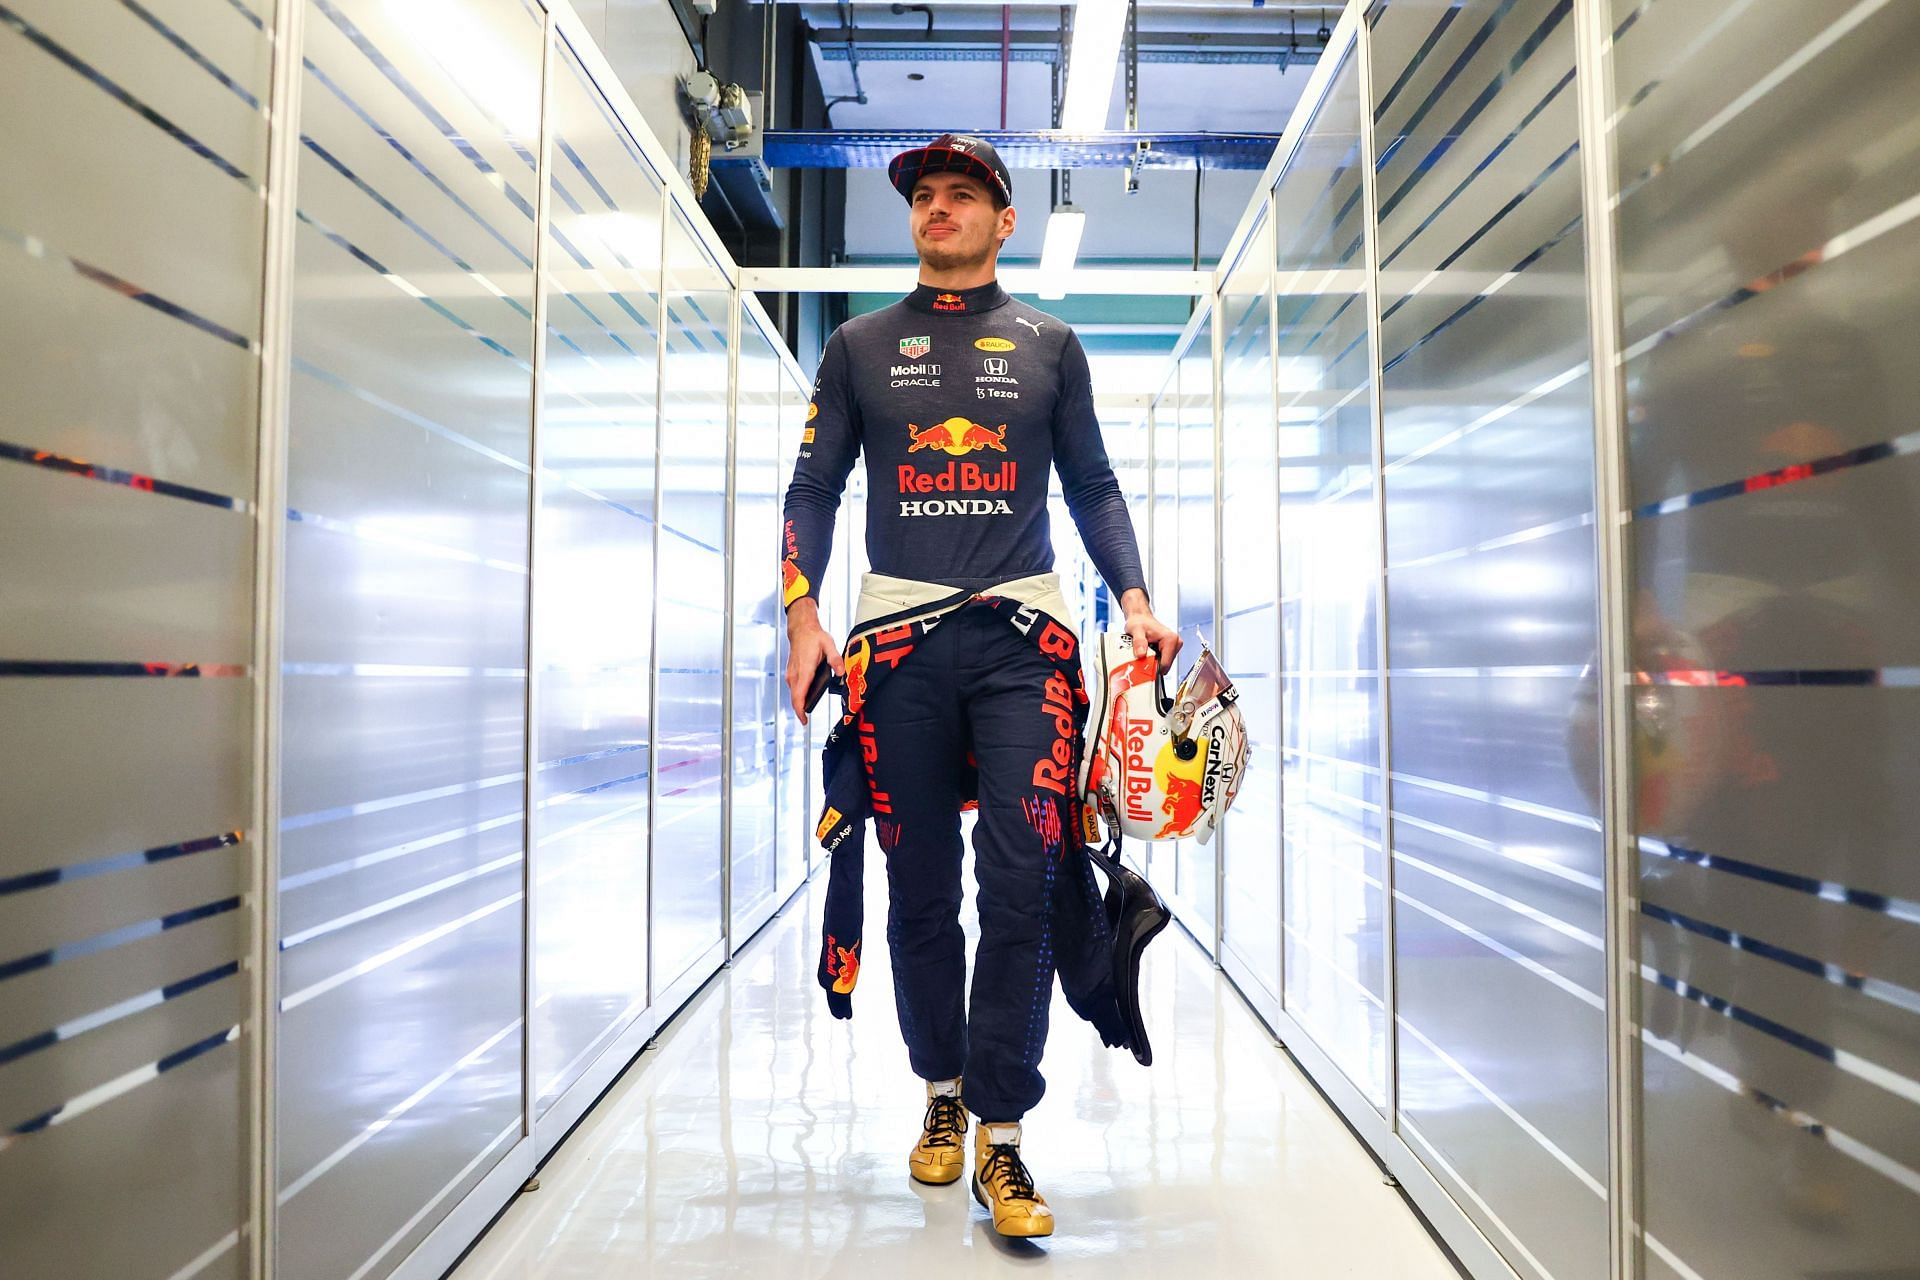 Max Verstappen walks into the garage during Formula 1 testing at Yas Marina Circuit. (Photo by Clive Rose/Getty Images)